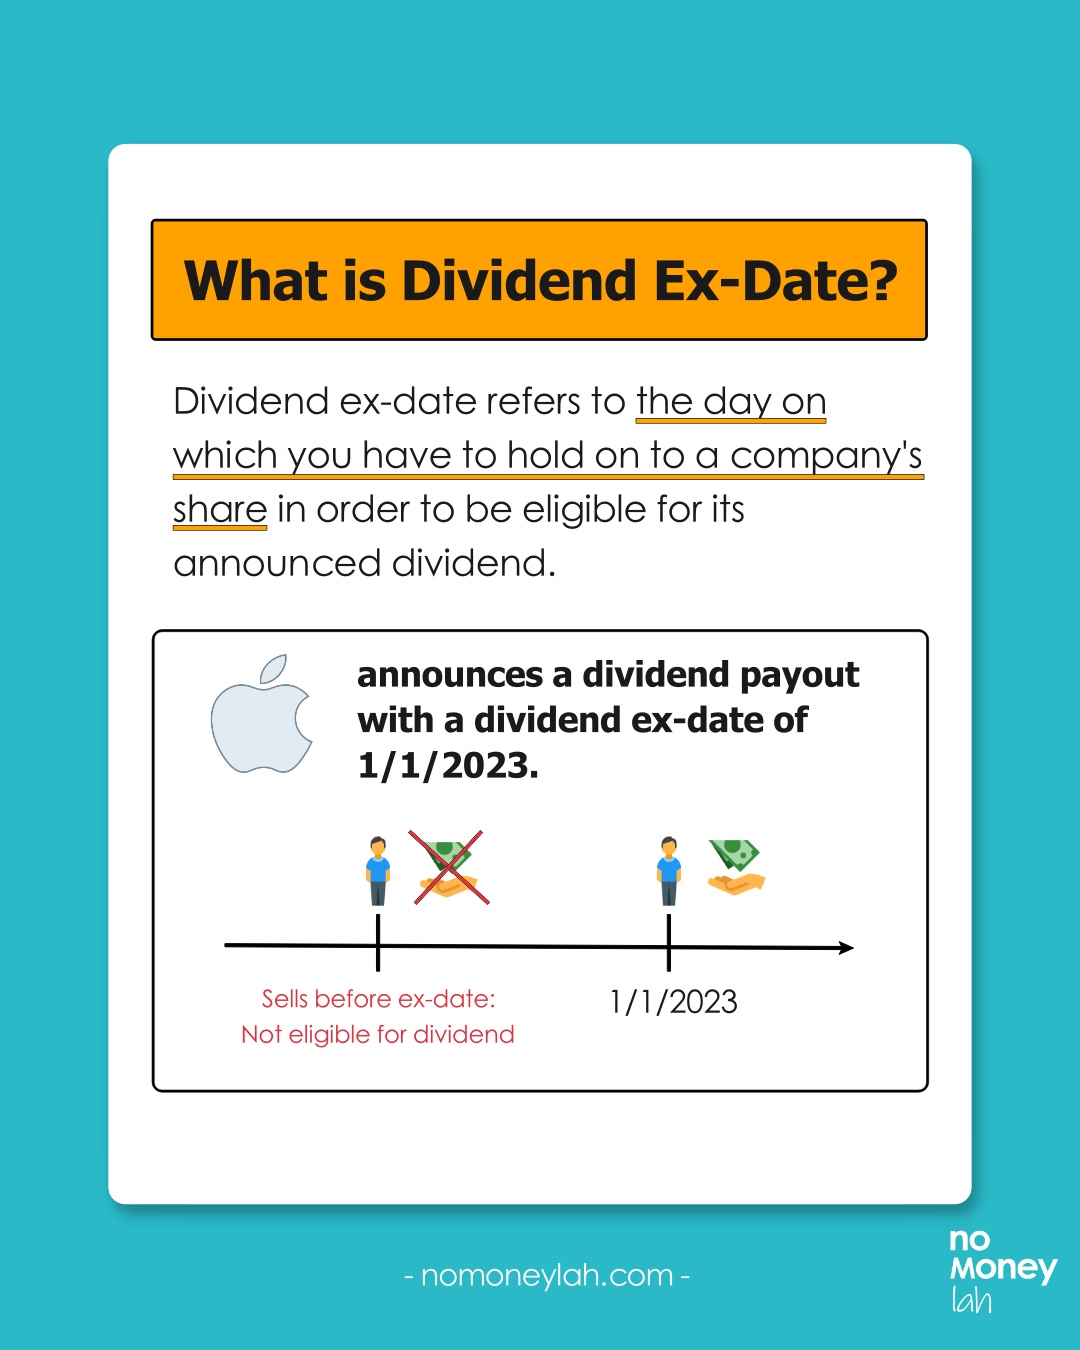 What is dividend ex-date